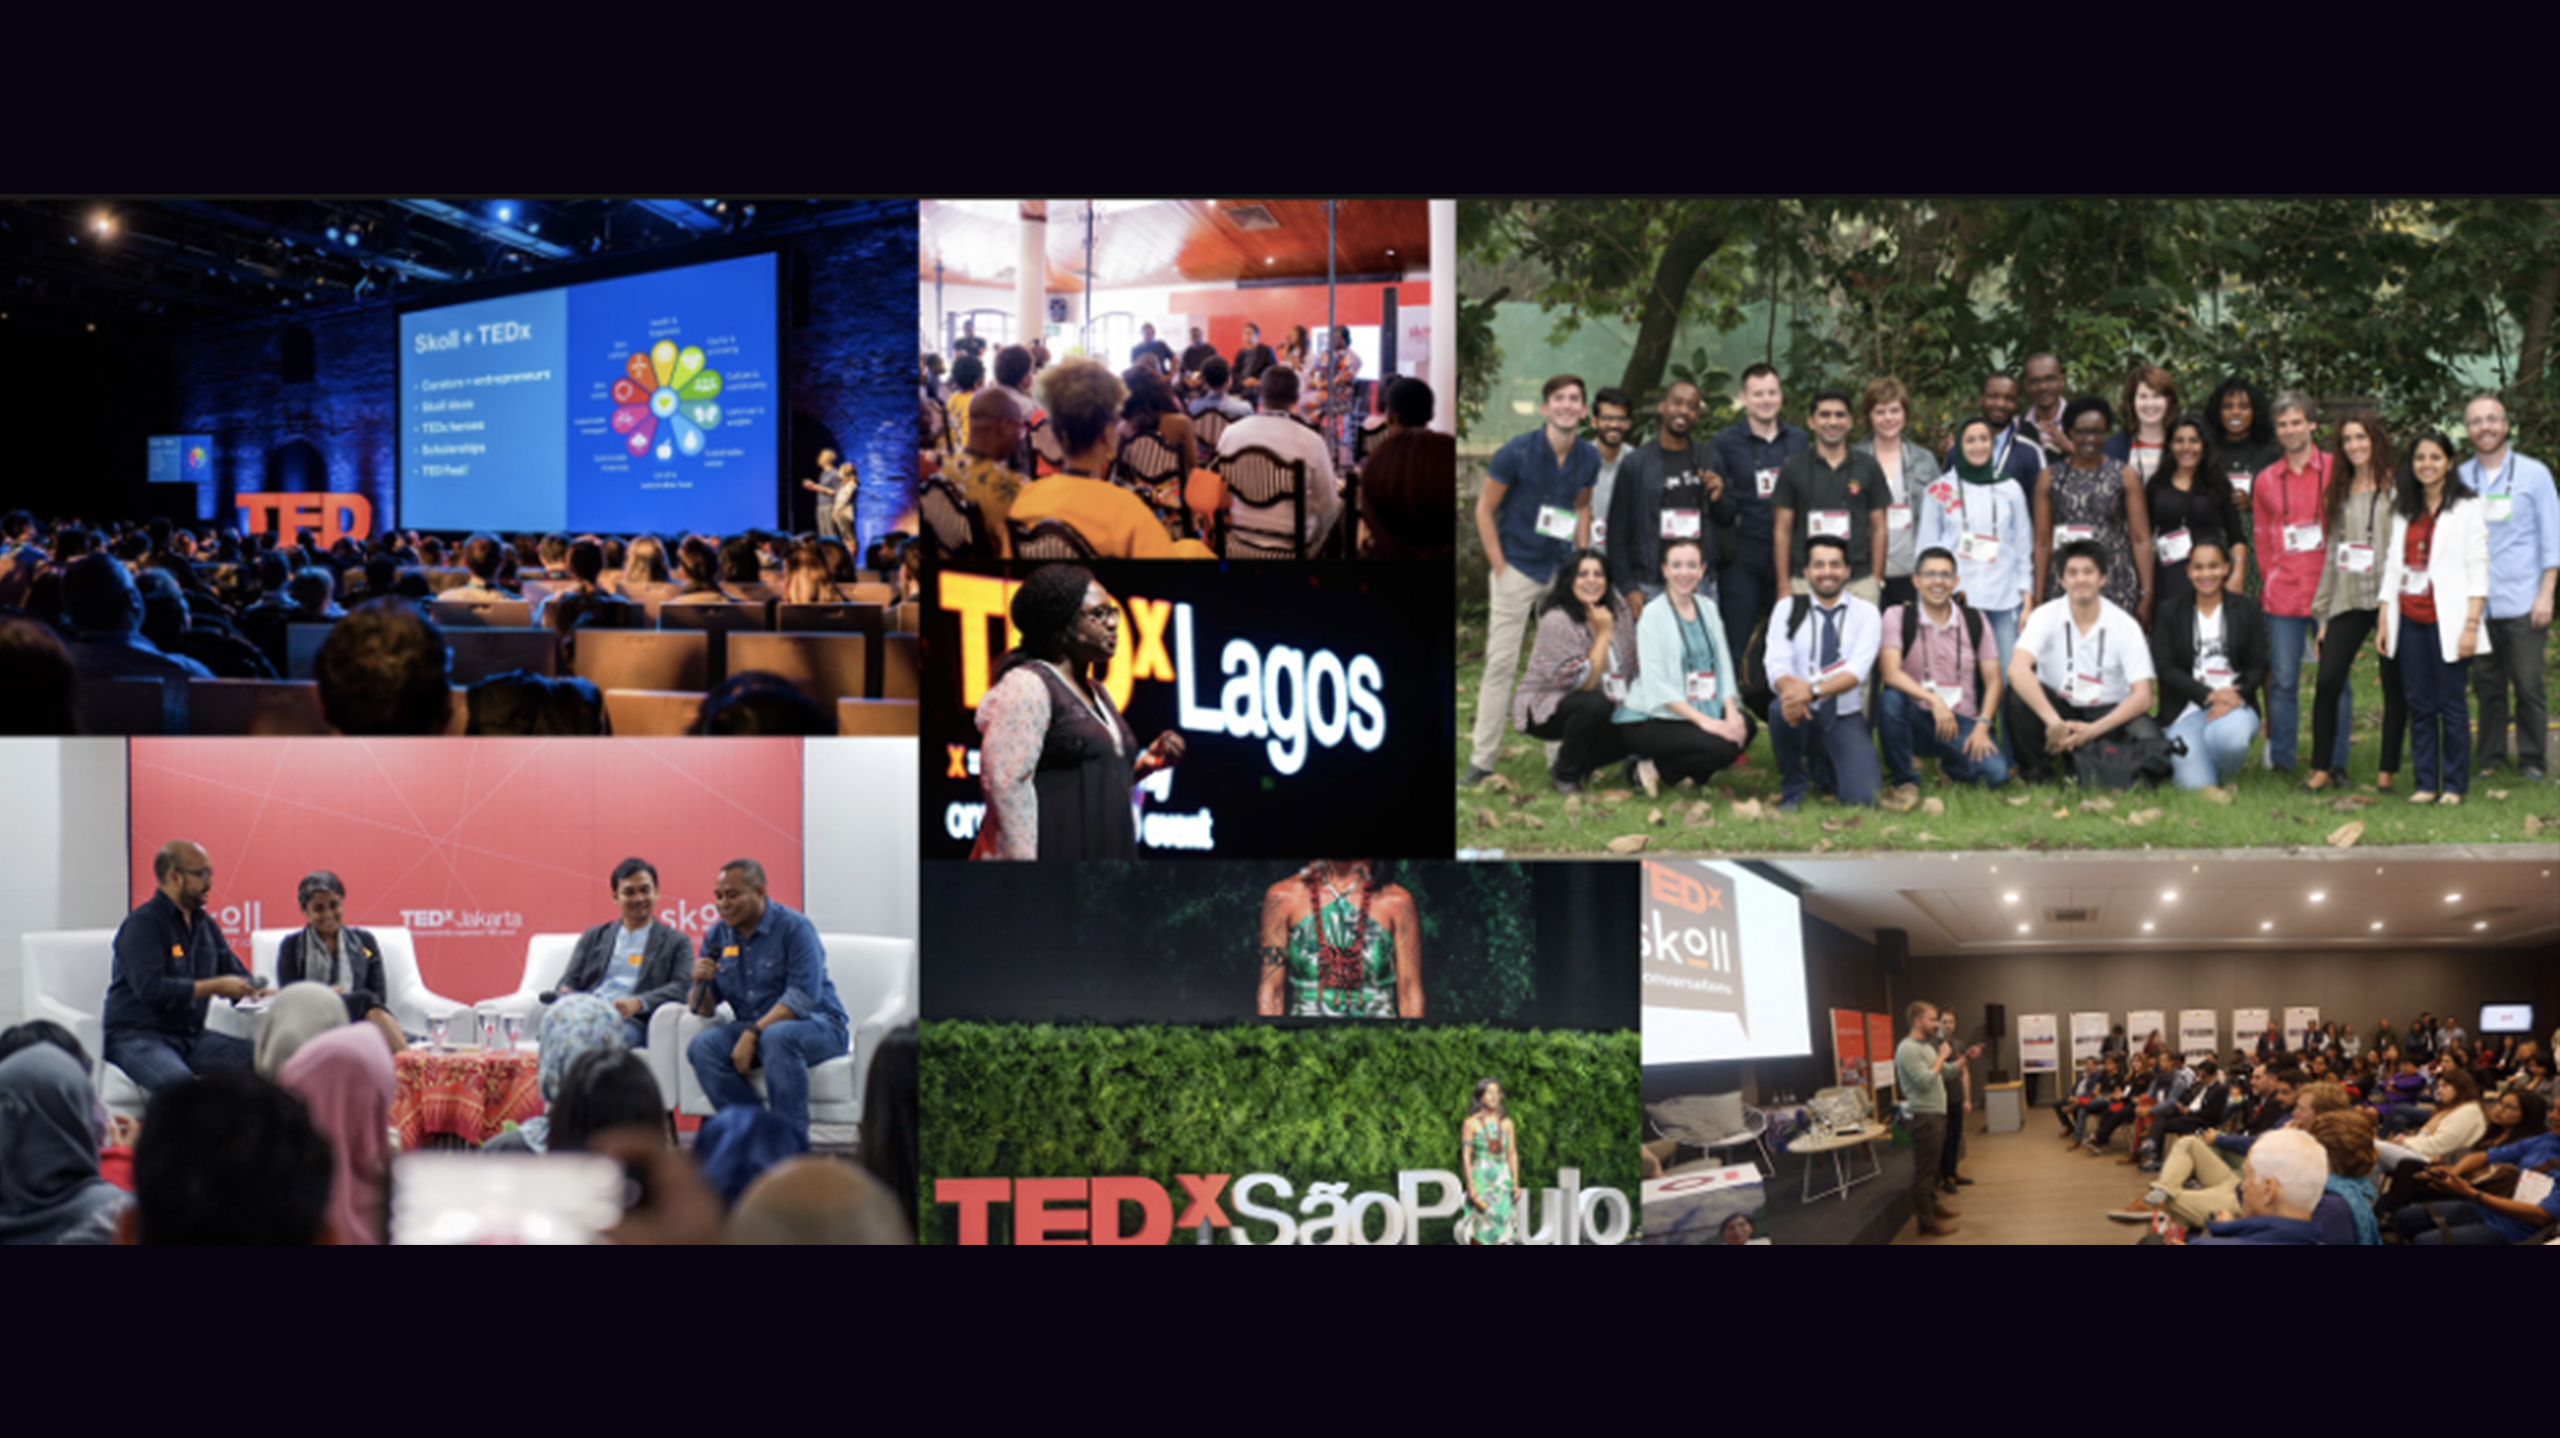 A collage of images from TEDx Skoll events